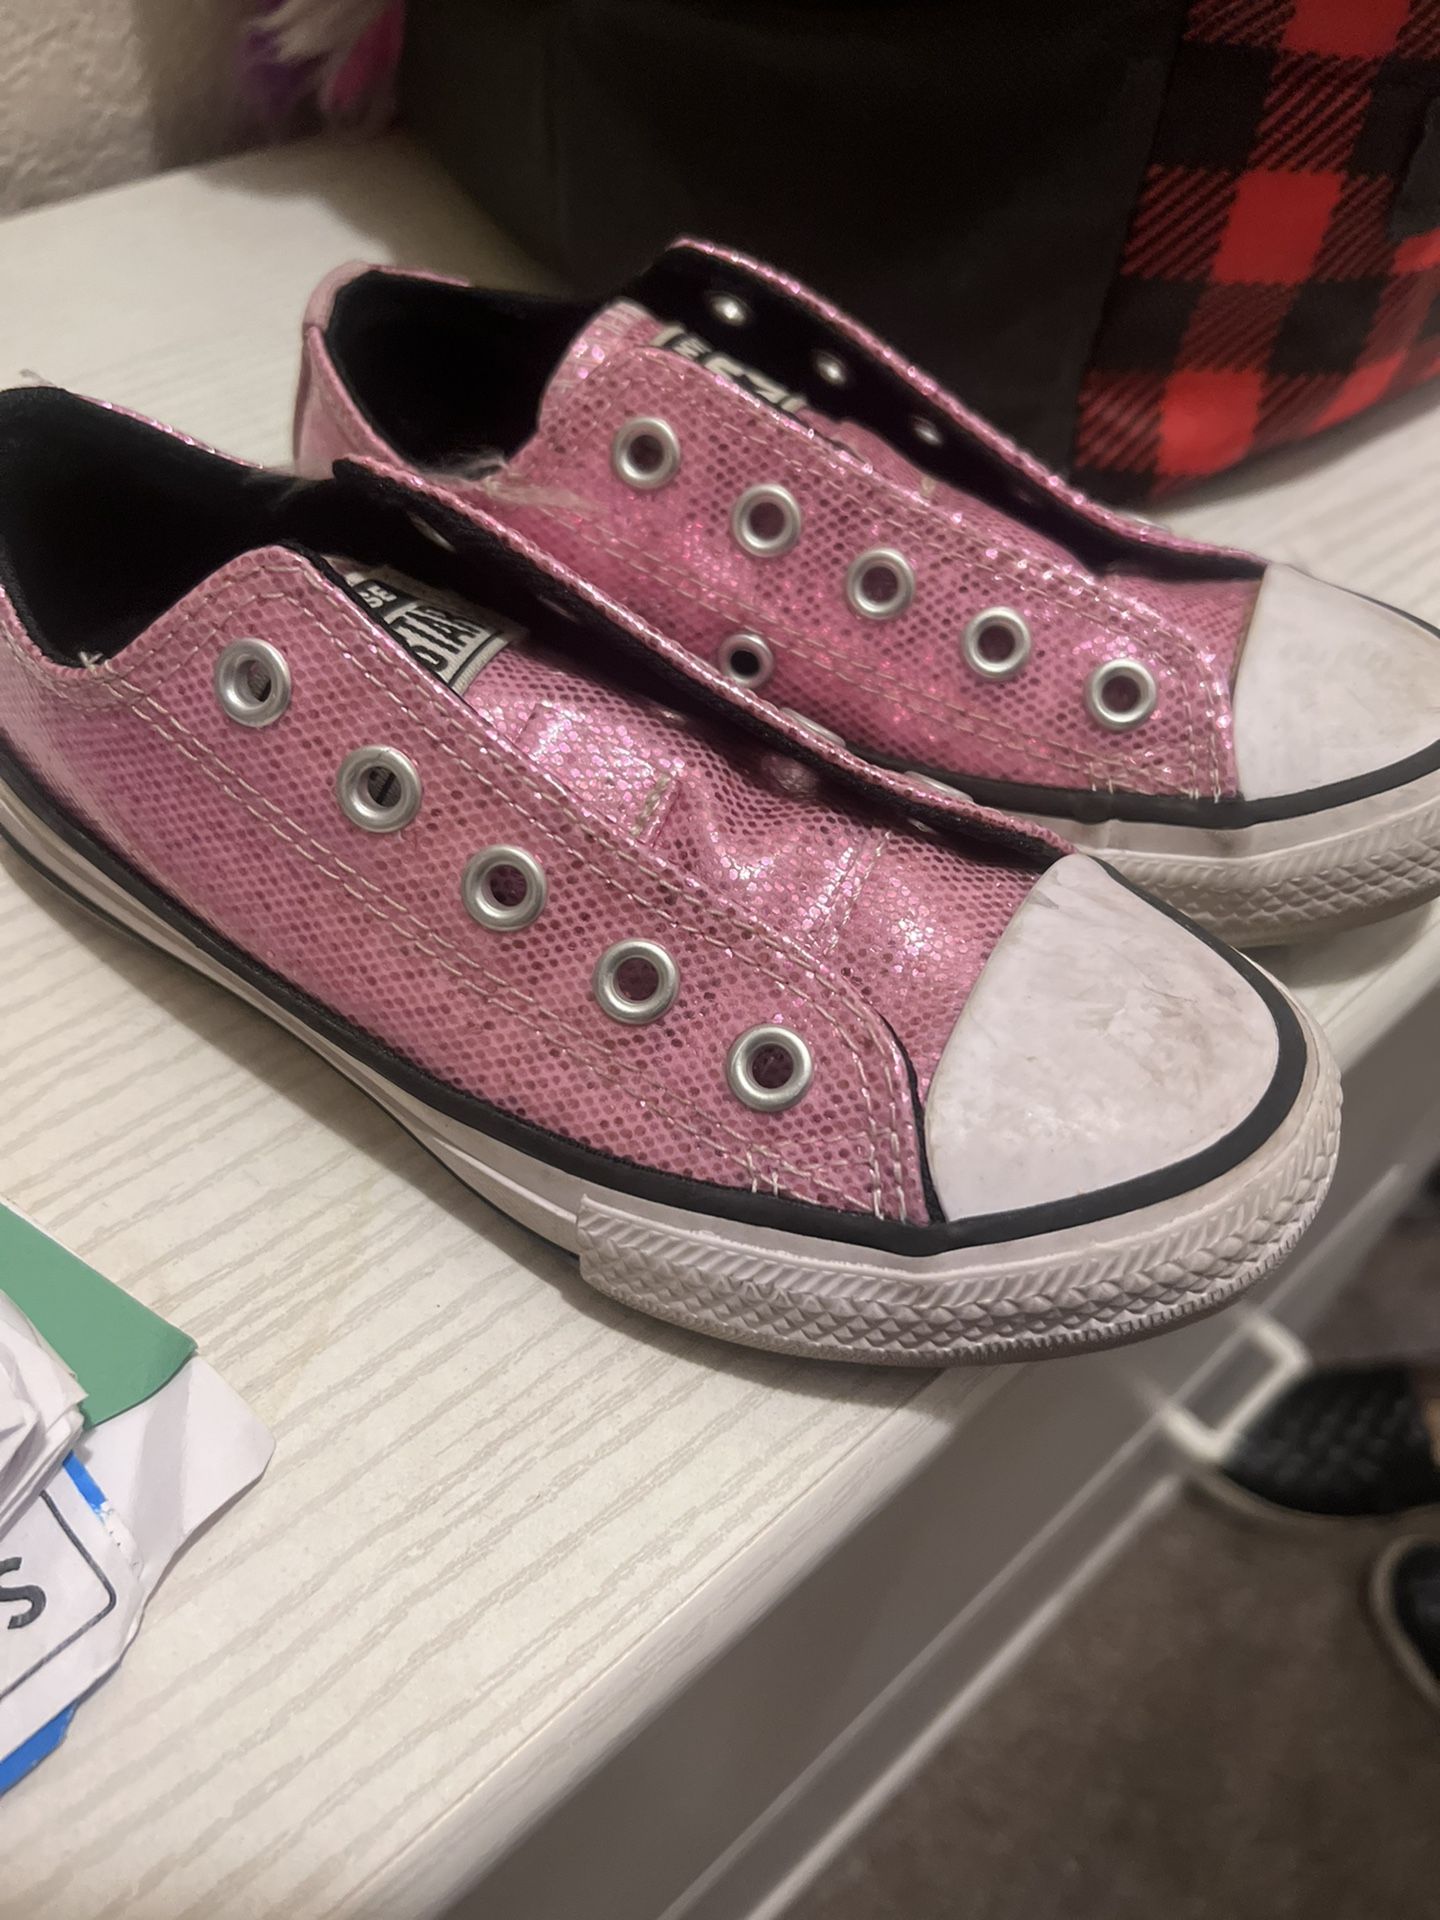 SPARKLY PINK CONVERSE LOW TOPS-SIZE 11